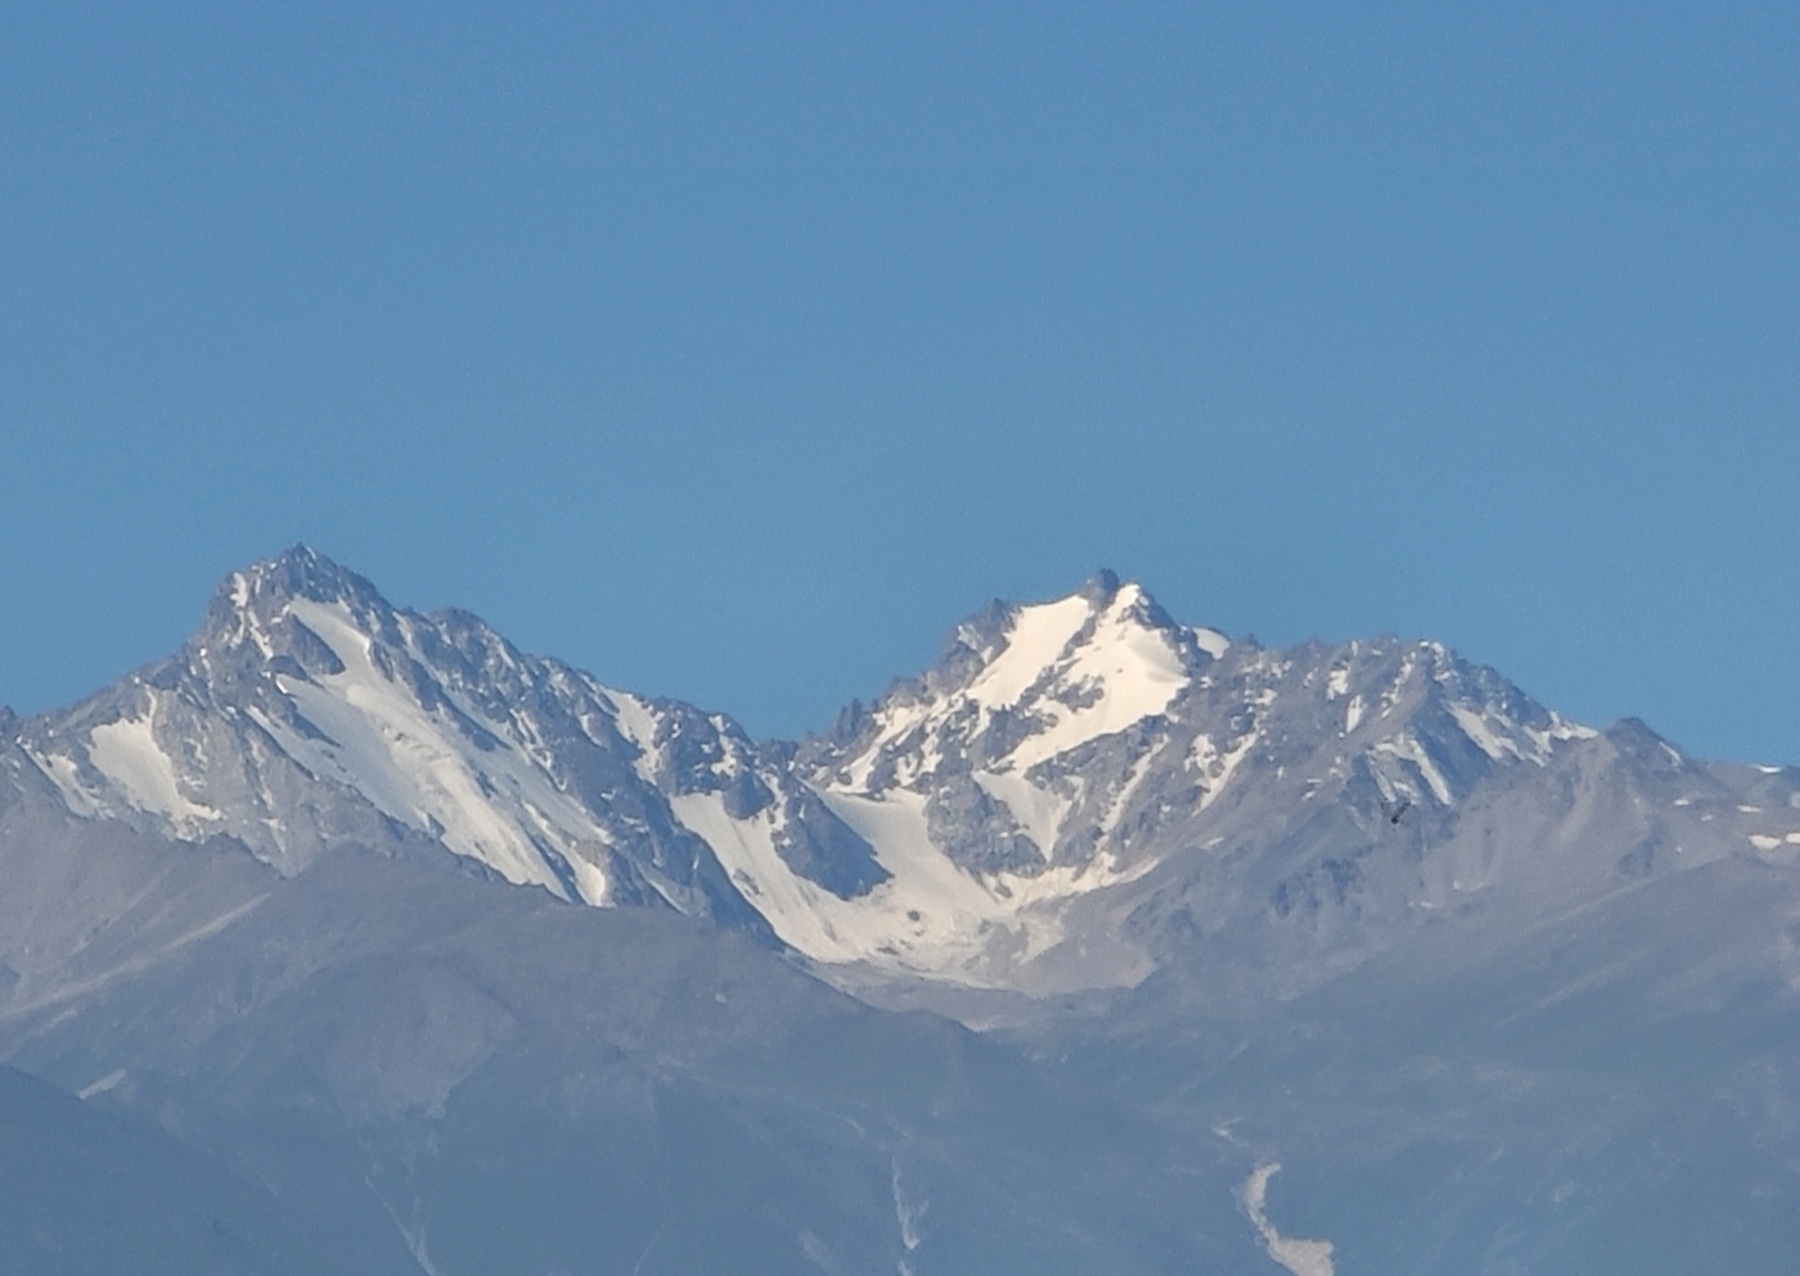 gray mountains with white peaks against a light blue sky